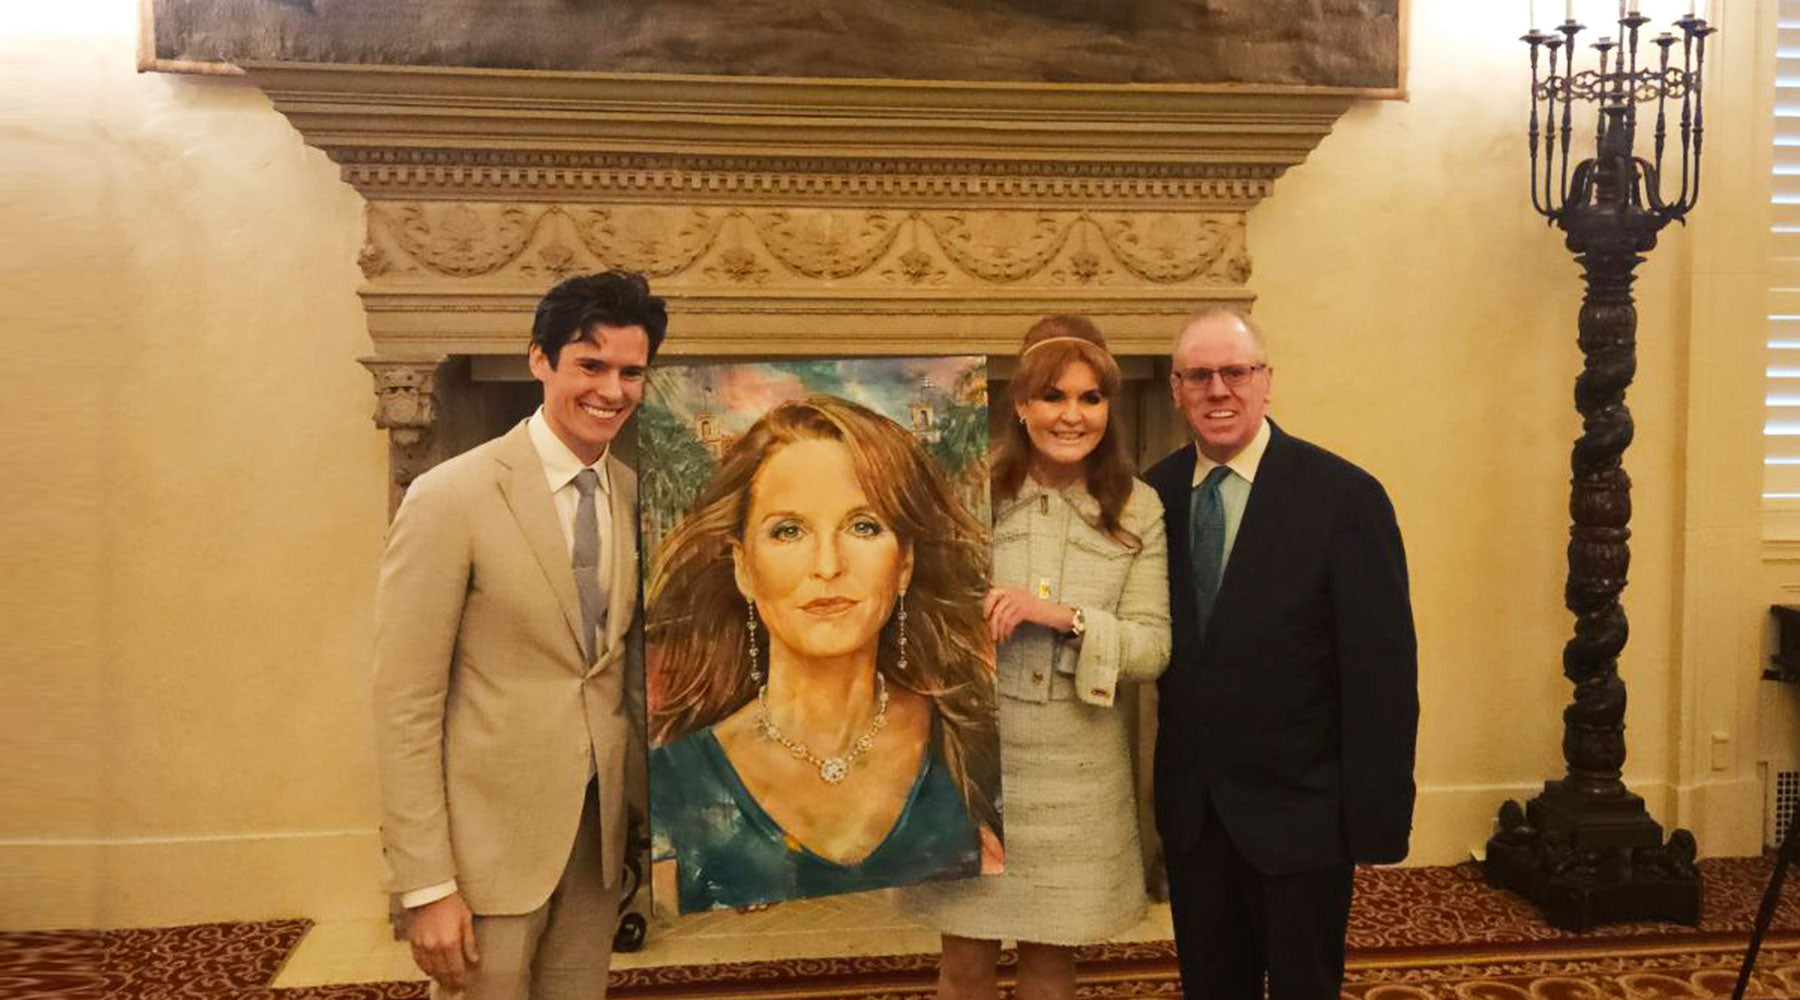 Meeting the Duchess of York and Upcoming Events